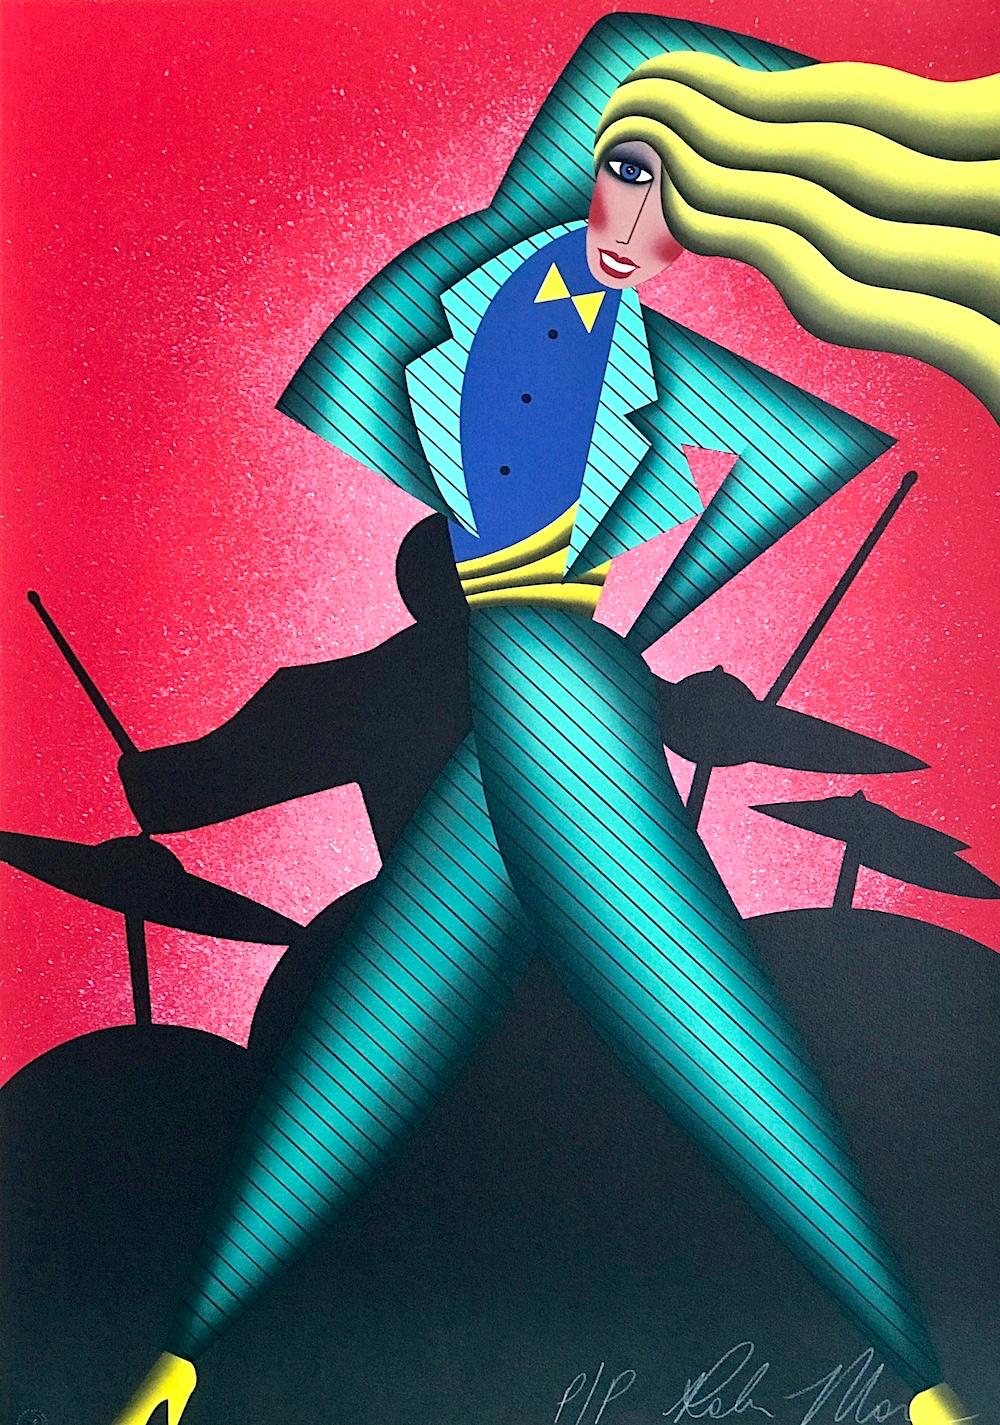 JUMPIN' JIVE Signed Lithograph, Dance Portrait Drummer, Red Green Yellow Black